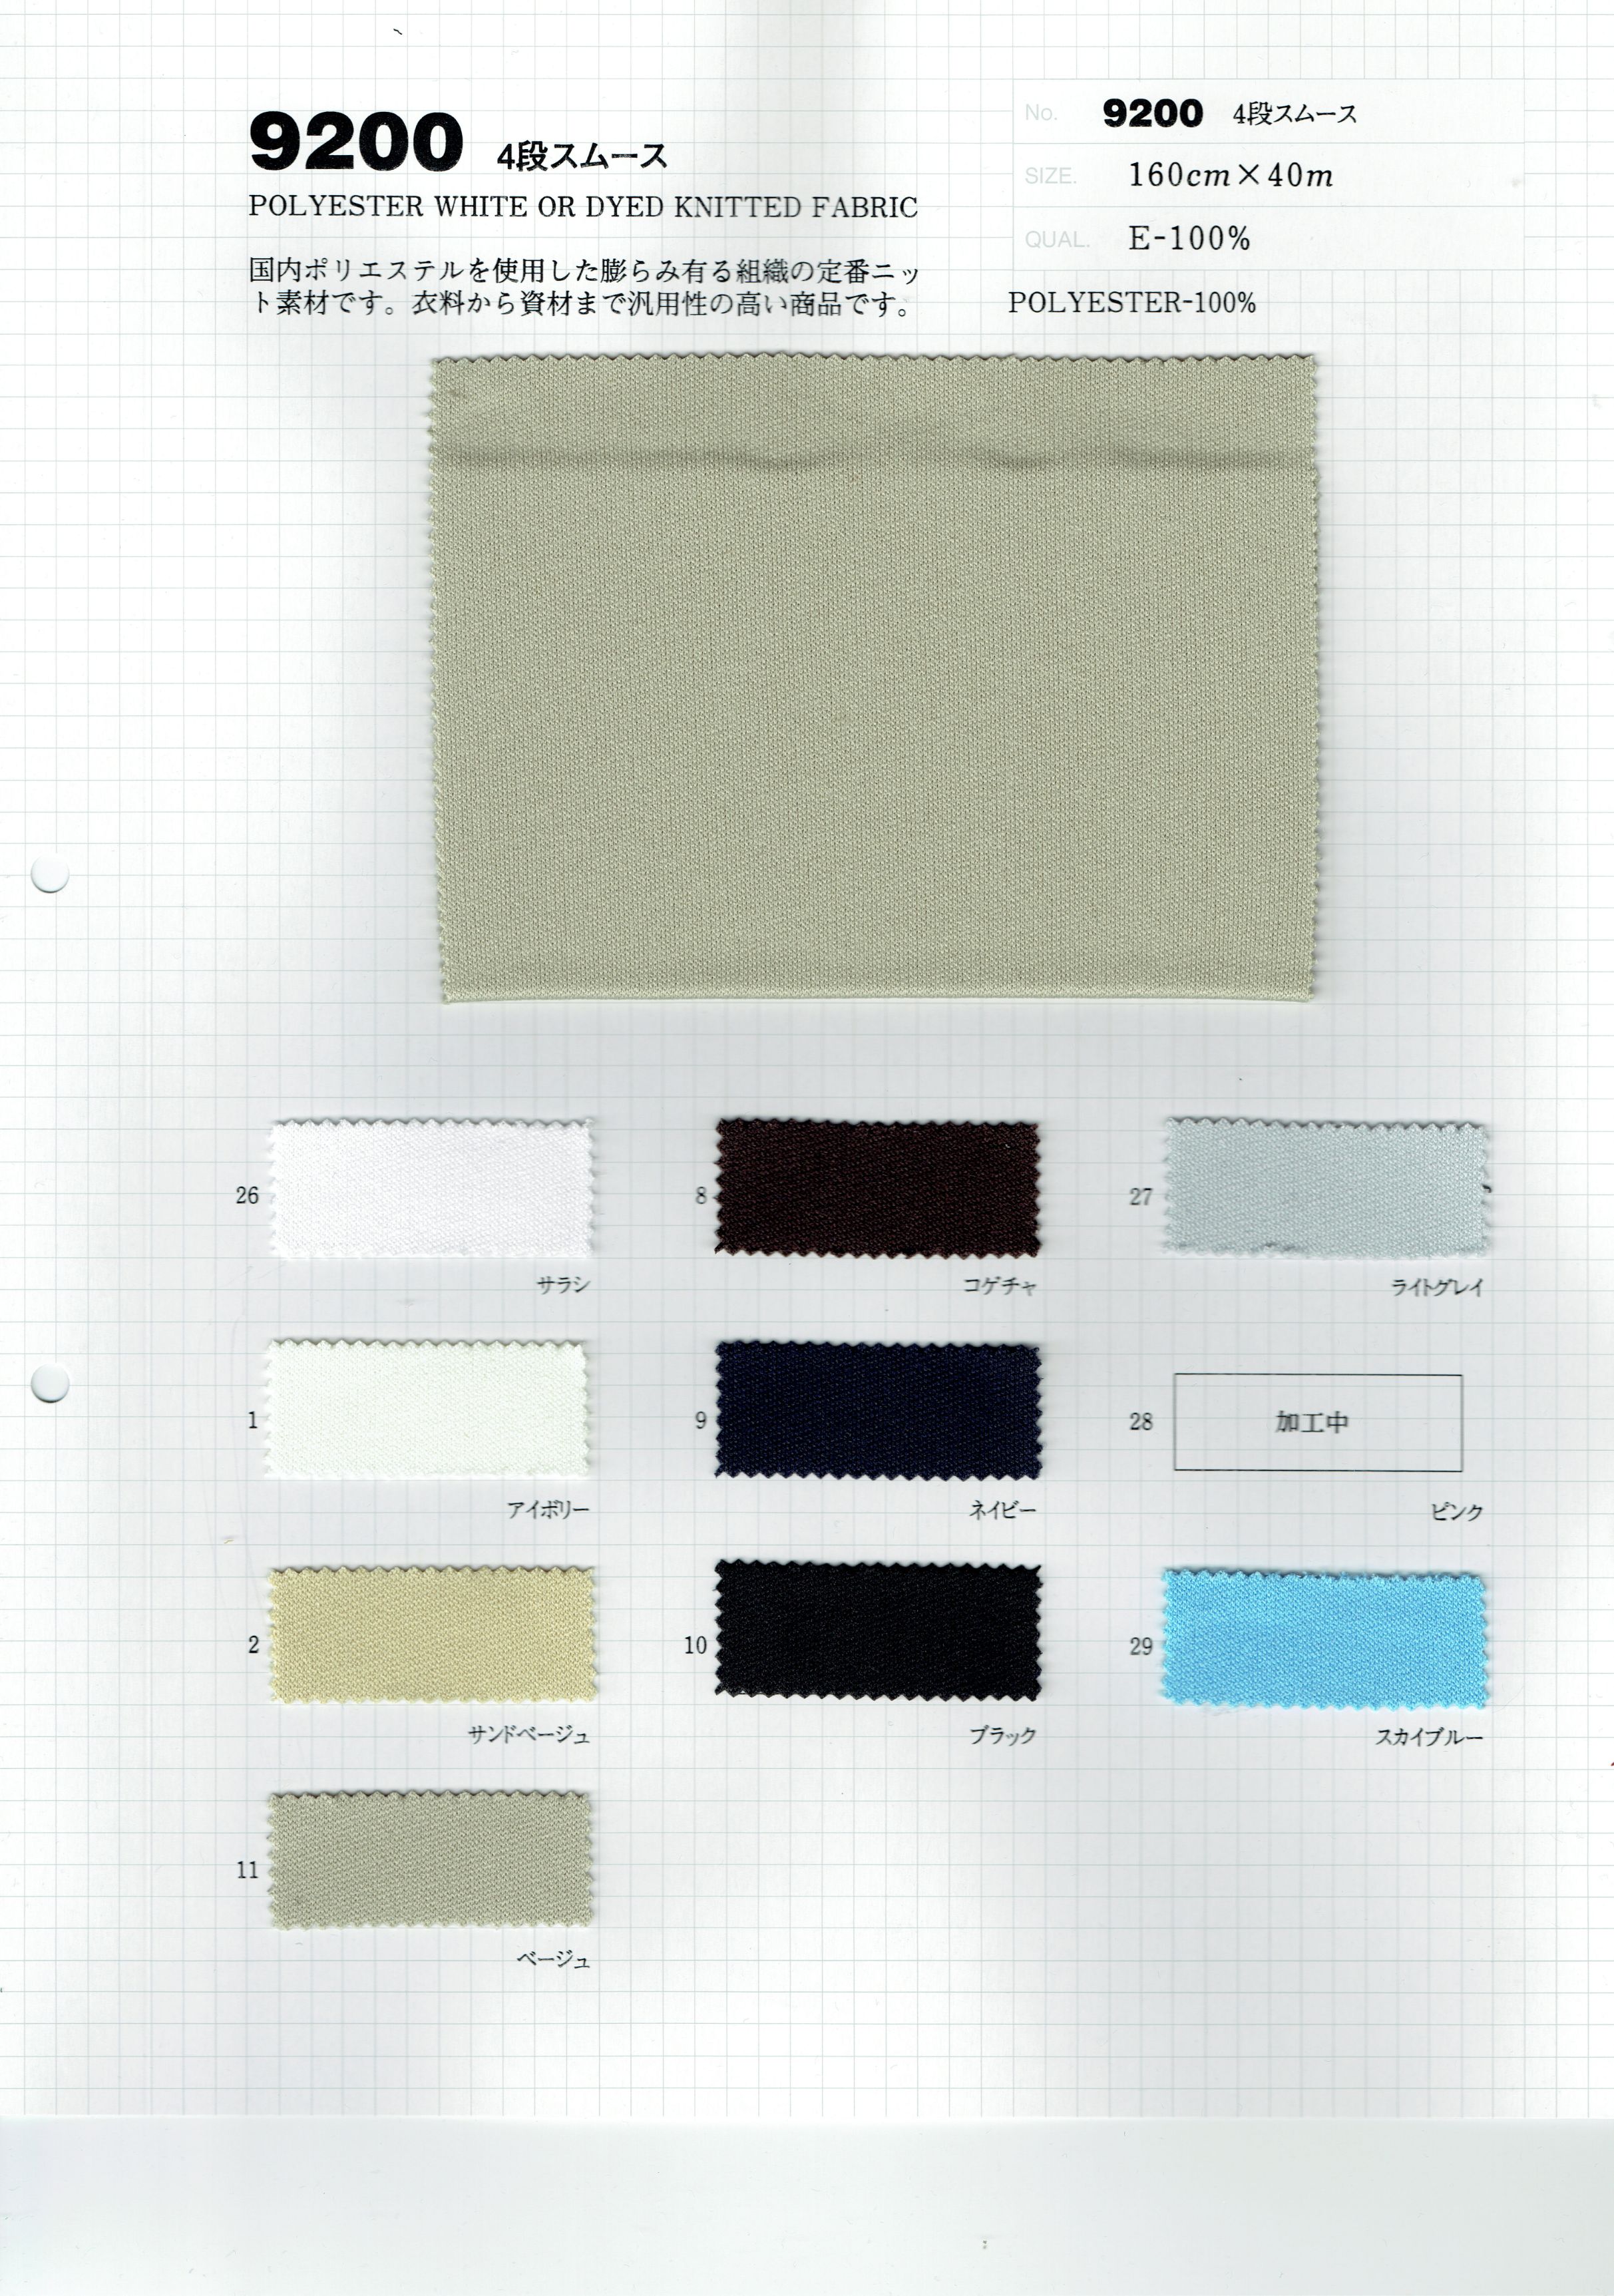 View 100% POLYESTER WHITE AMD/OR DYED KNITTED FABRIC